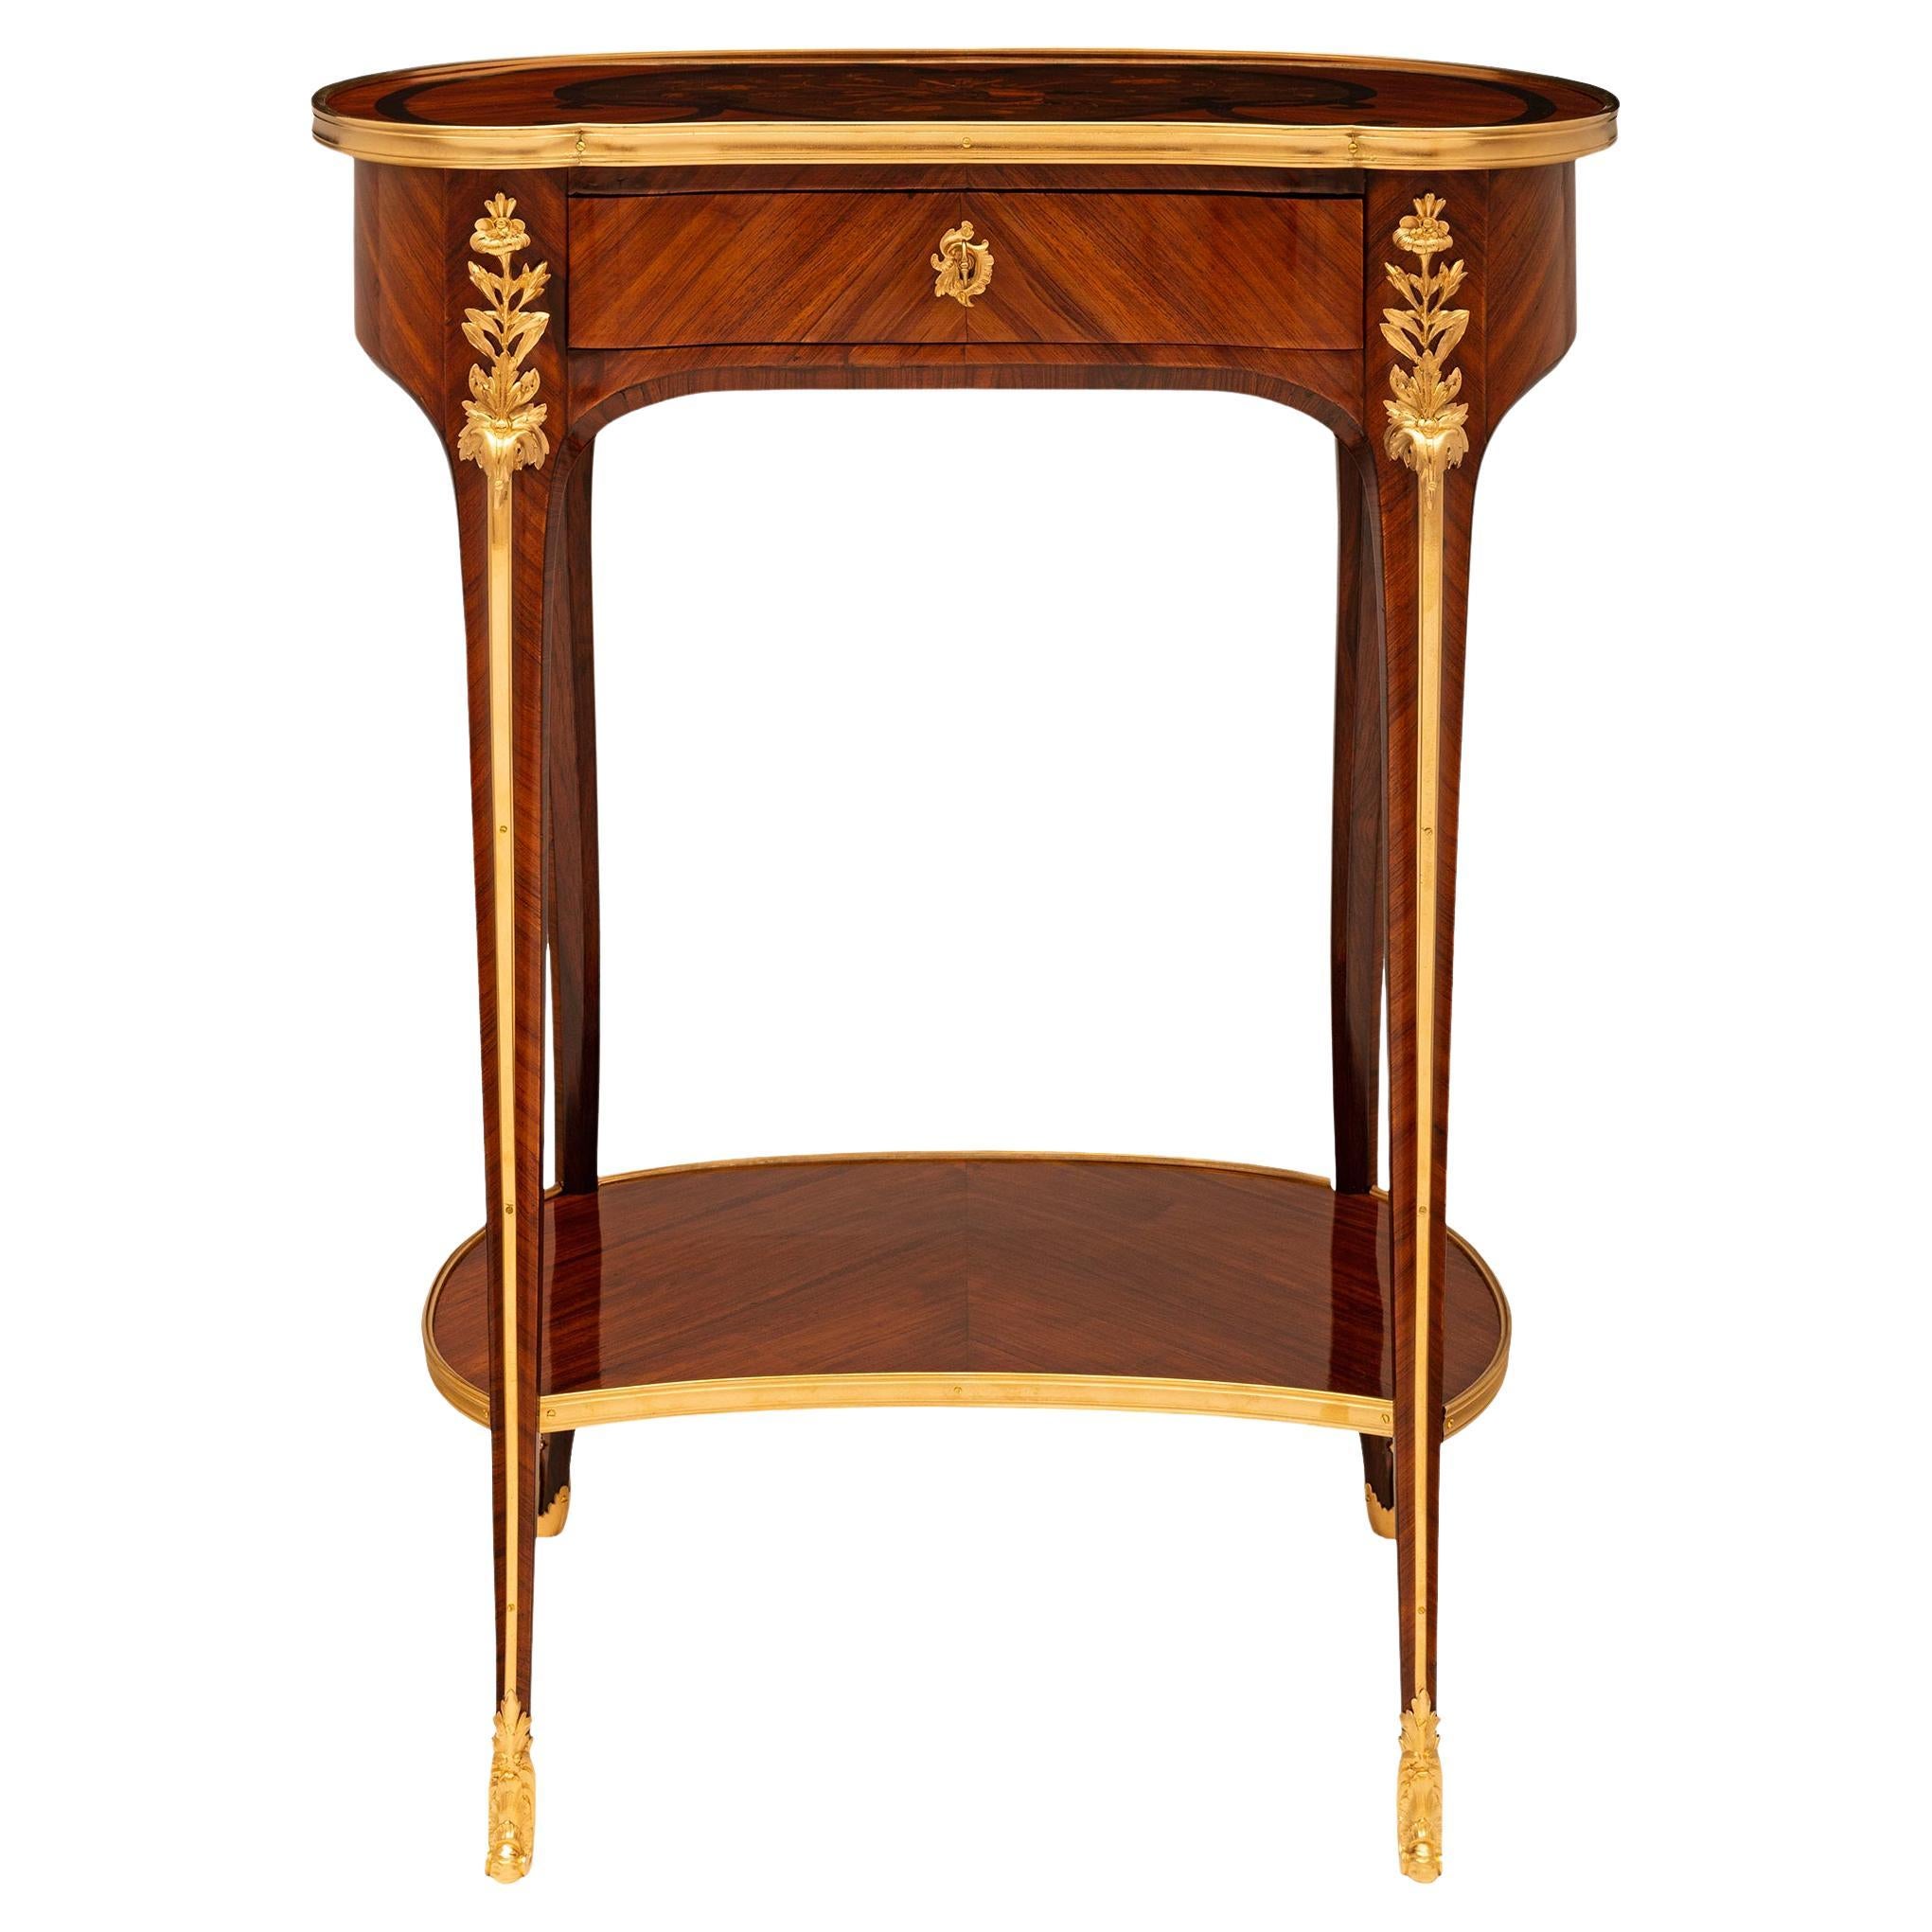 French 19th century Louis XV st. Kingwood, Tulipwood, and Ormolu side table